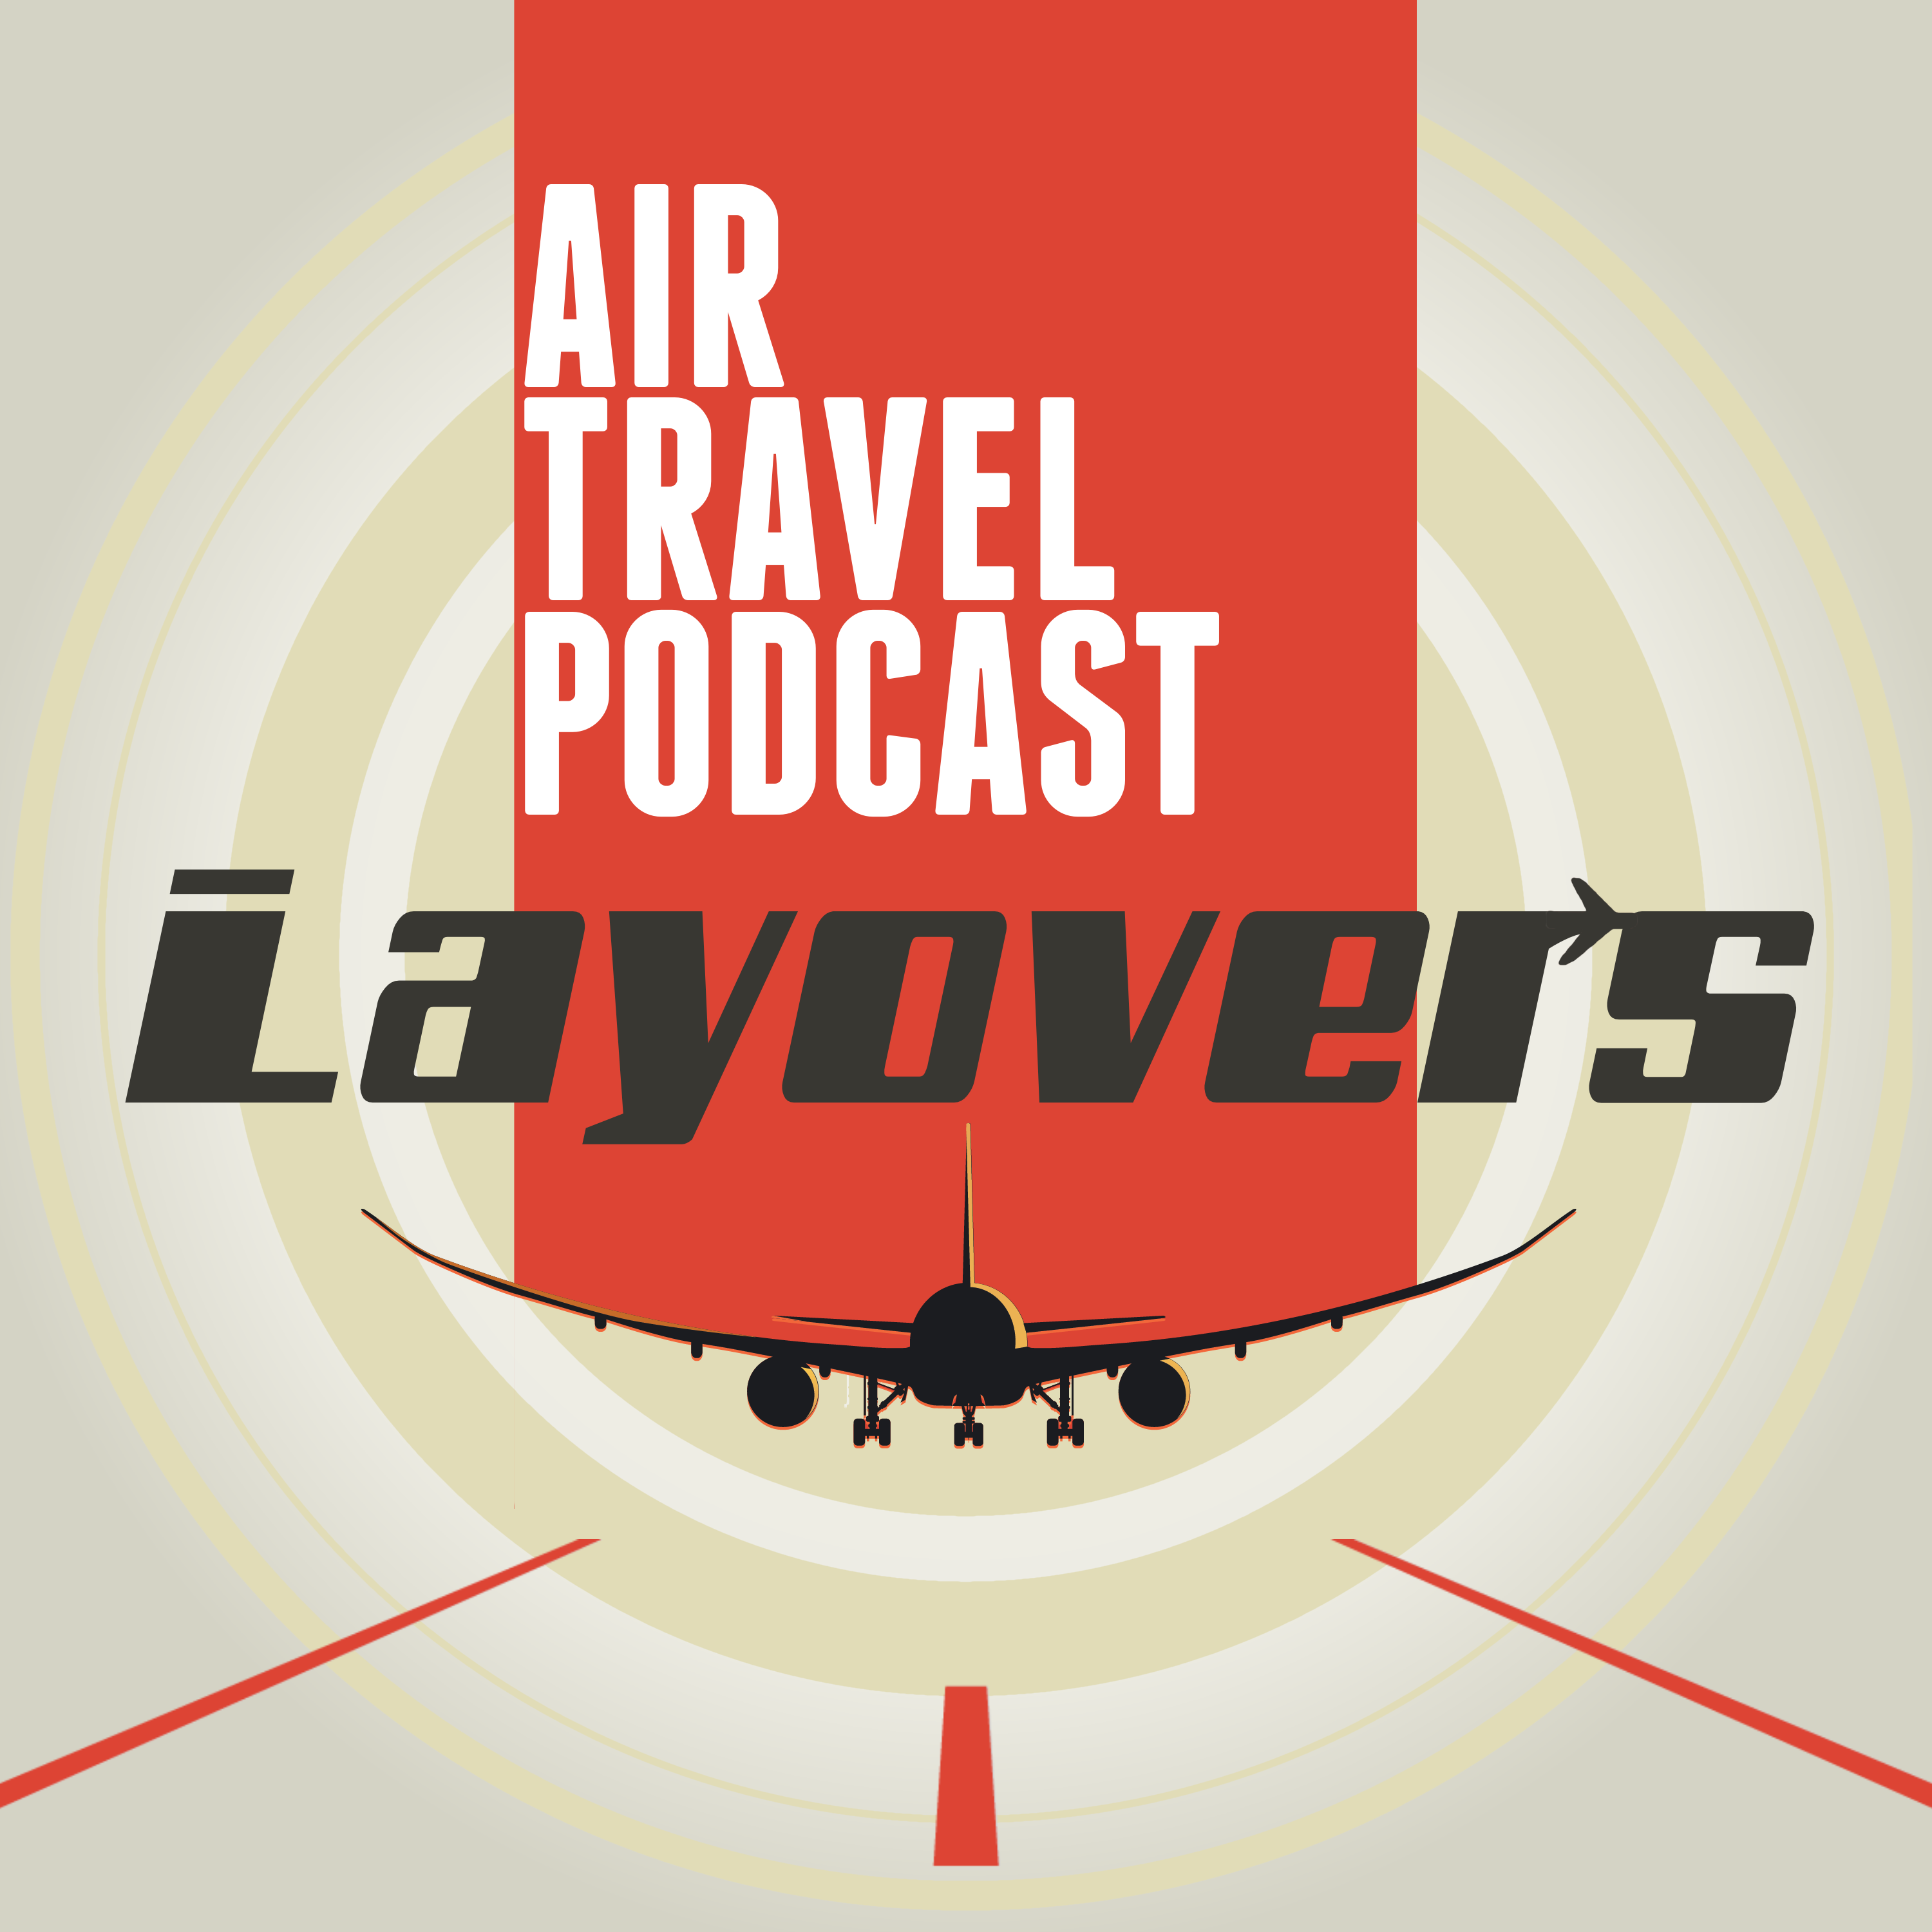 Layovers - Air Travel podcast podcast show image